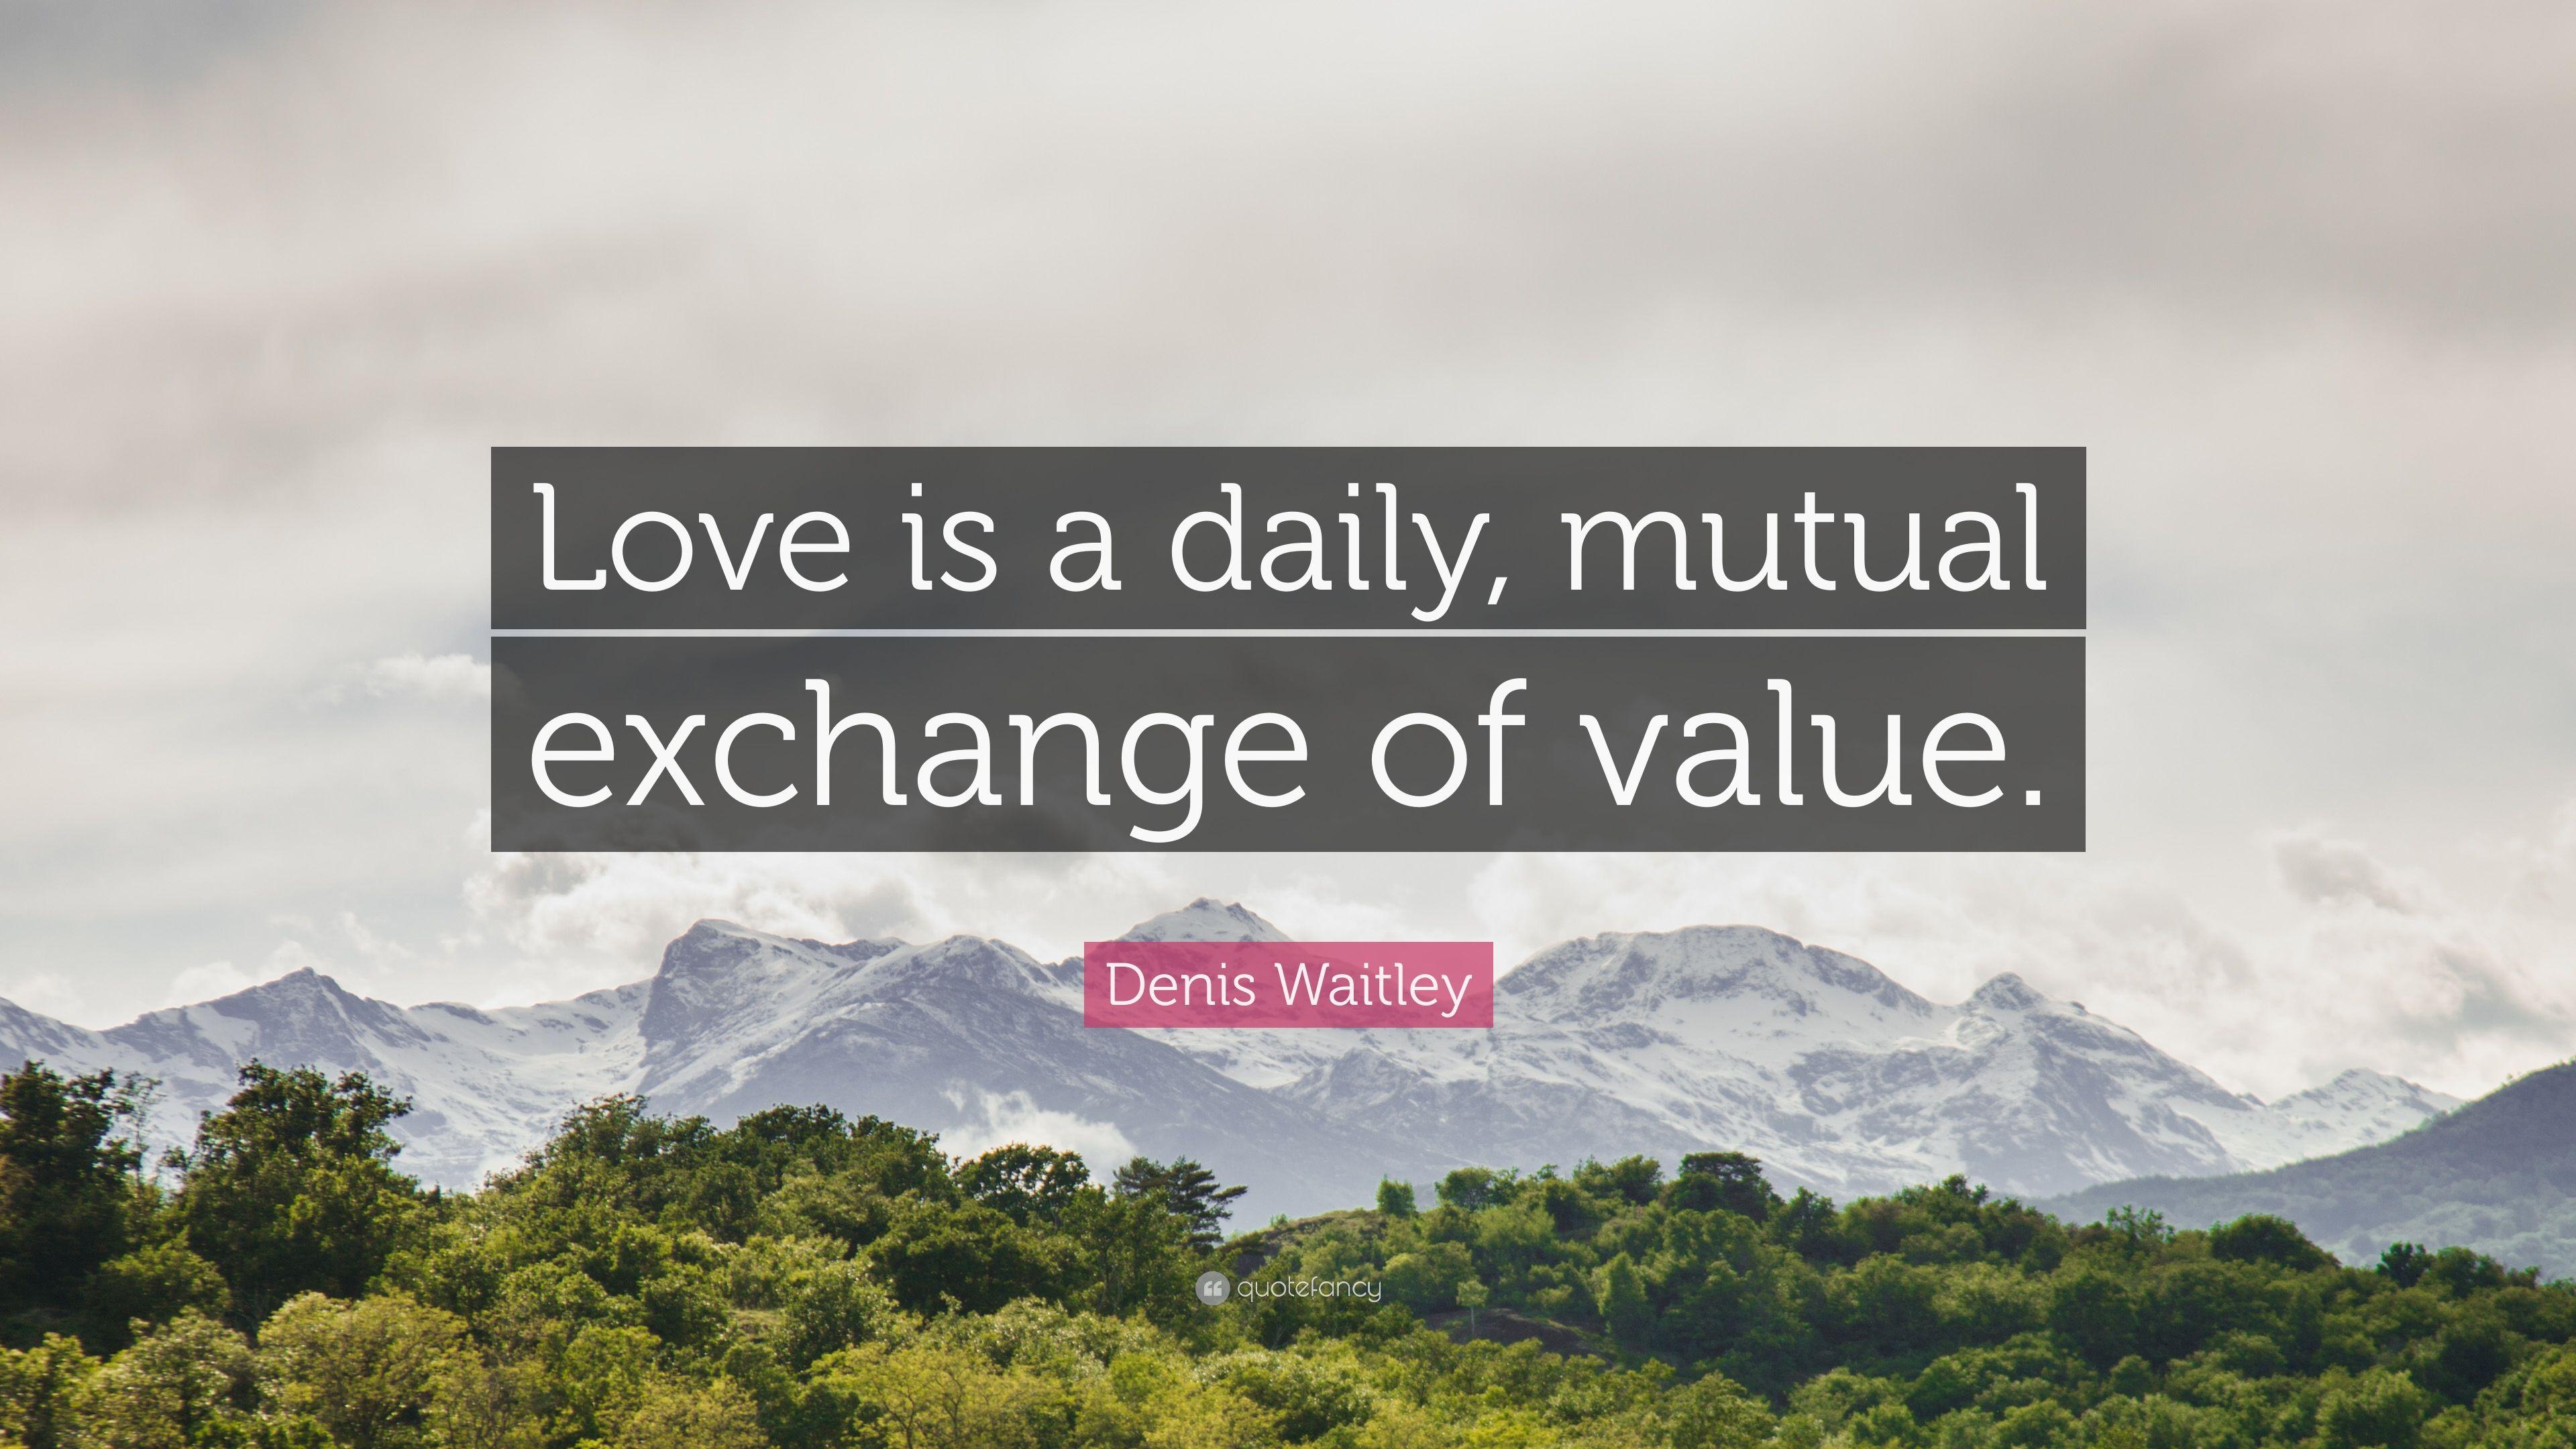 Denis Waitley Quote: “Love is a daily, mutual exchange of value